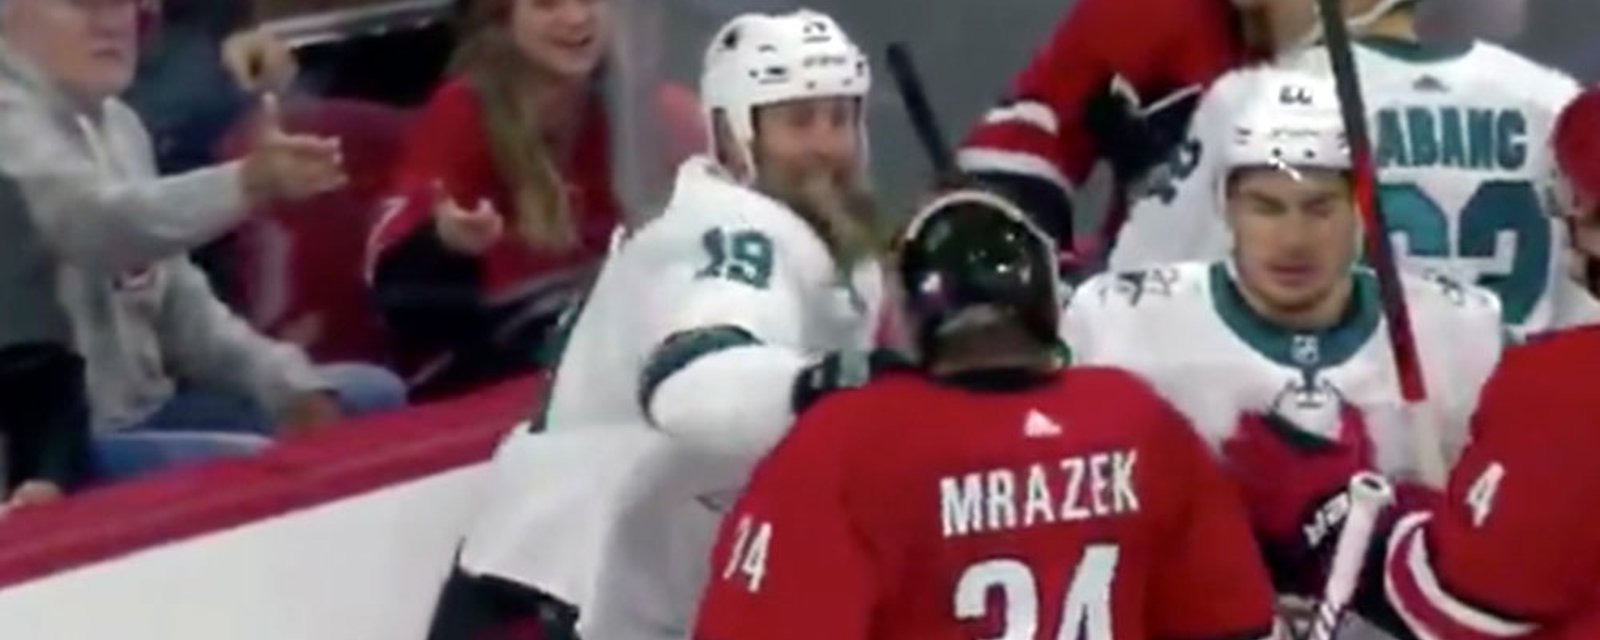 Thornton absolutely DROPS Mrazek with one punch